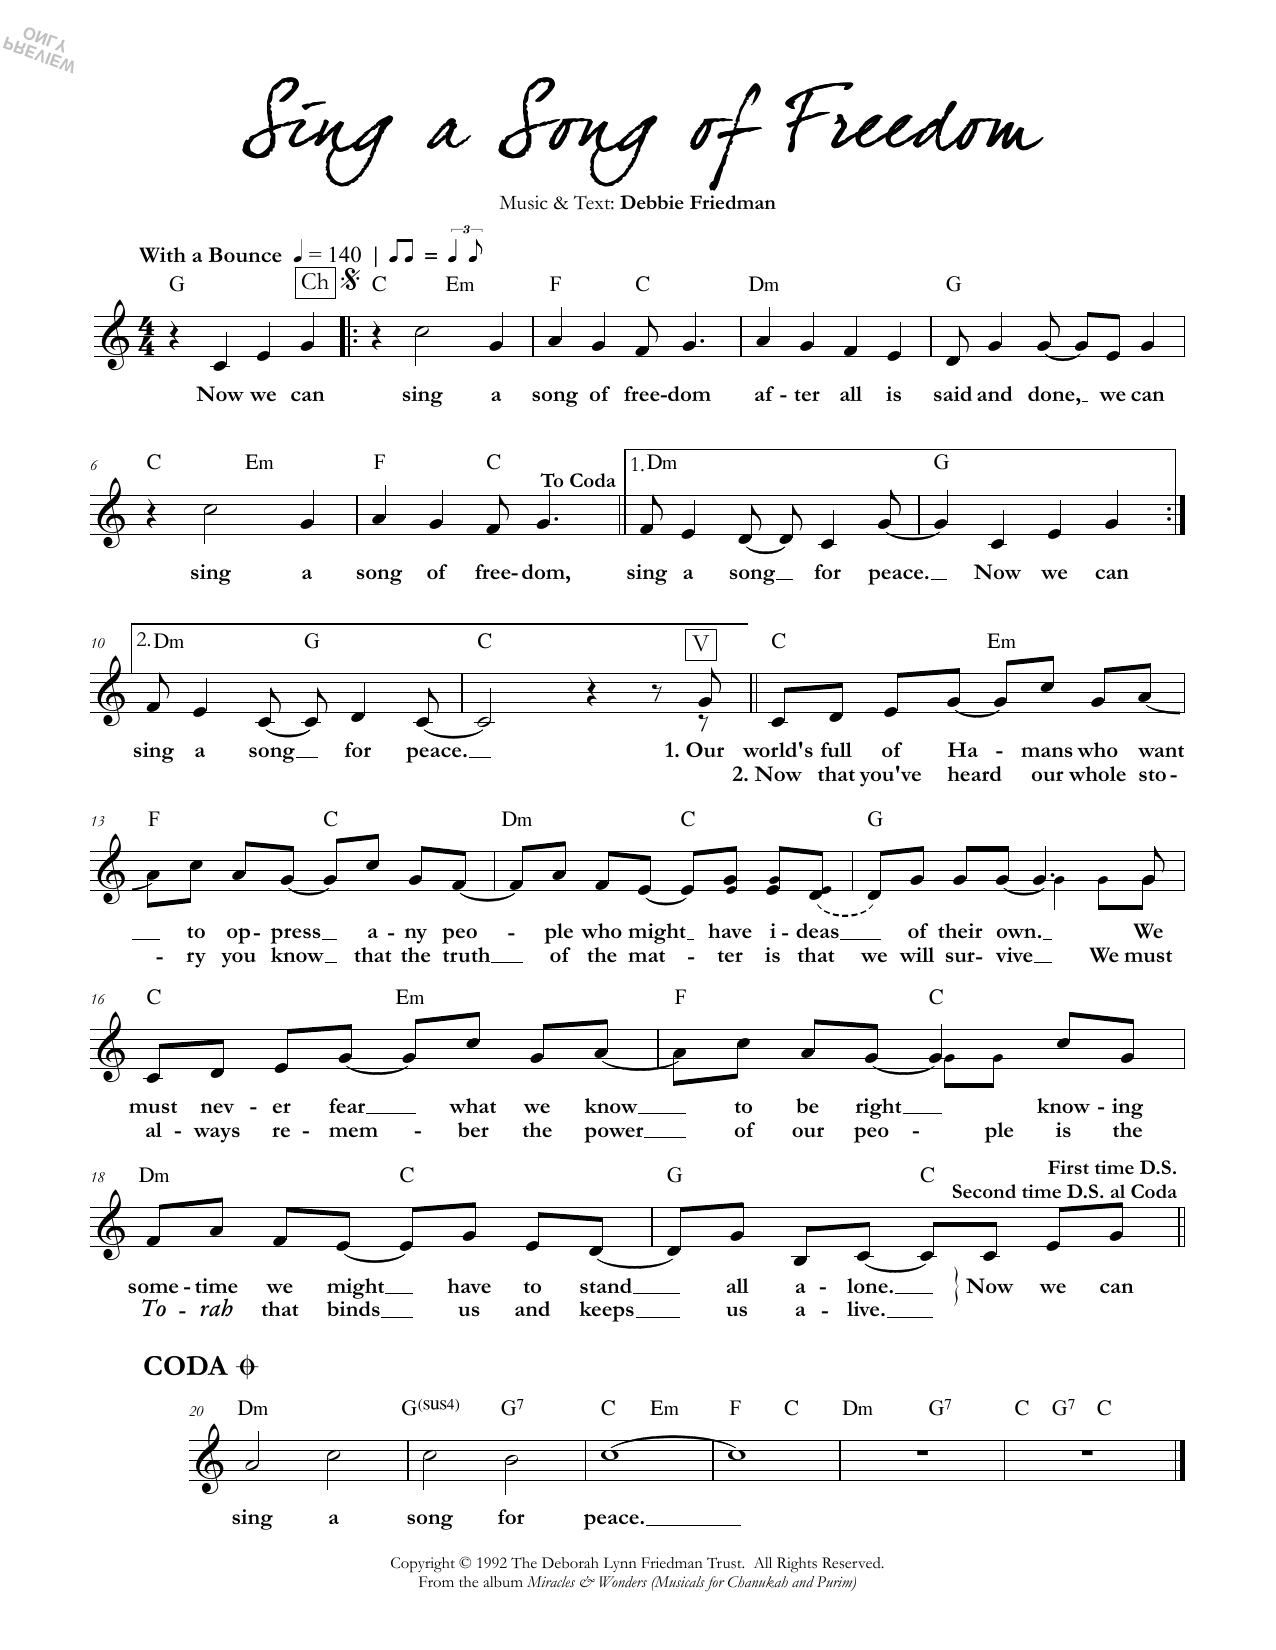 Download Debbie Friedman Sing a Song of Freedom Sheet Music